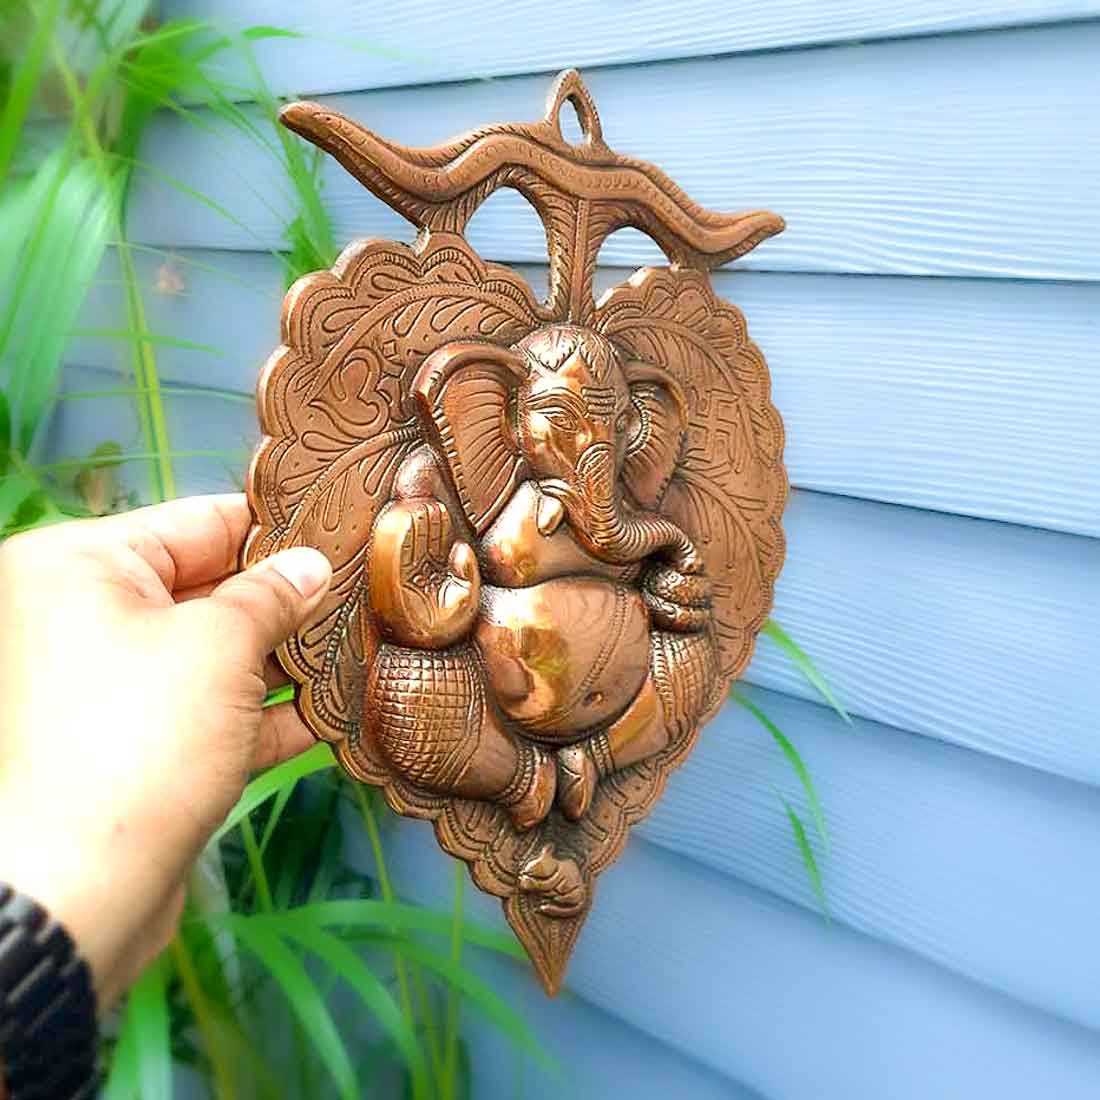 Ganesh Idol Wall Hanging | Lord Ganesha With Leaf Design Wall Statue Decor |Religoius & Spiritual Wall Art - For Puja, Home & Entrance  Living Room & Gift - 13 Inch